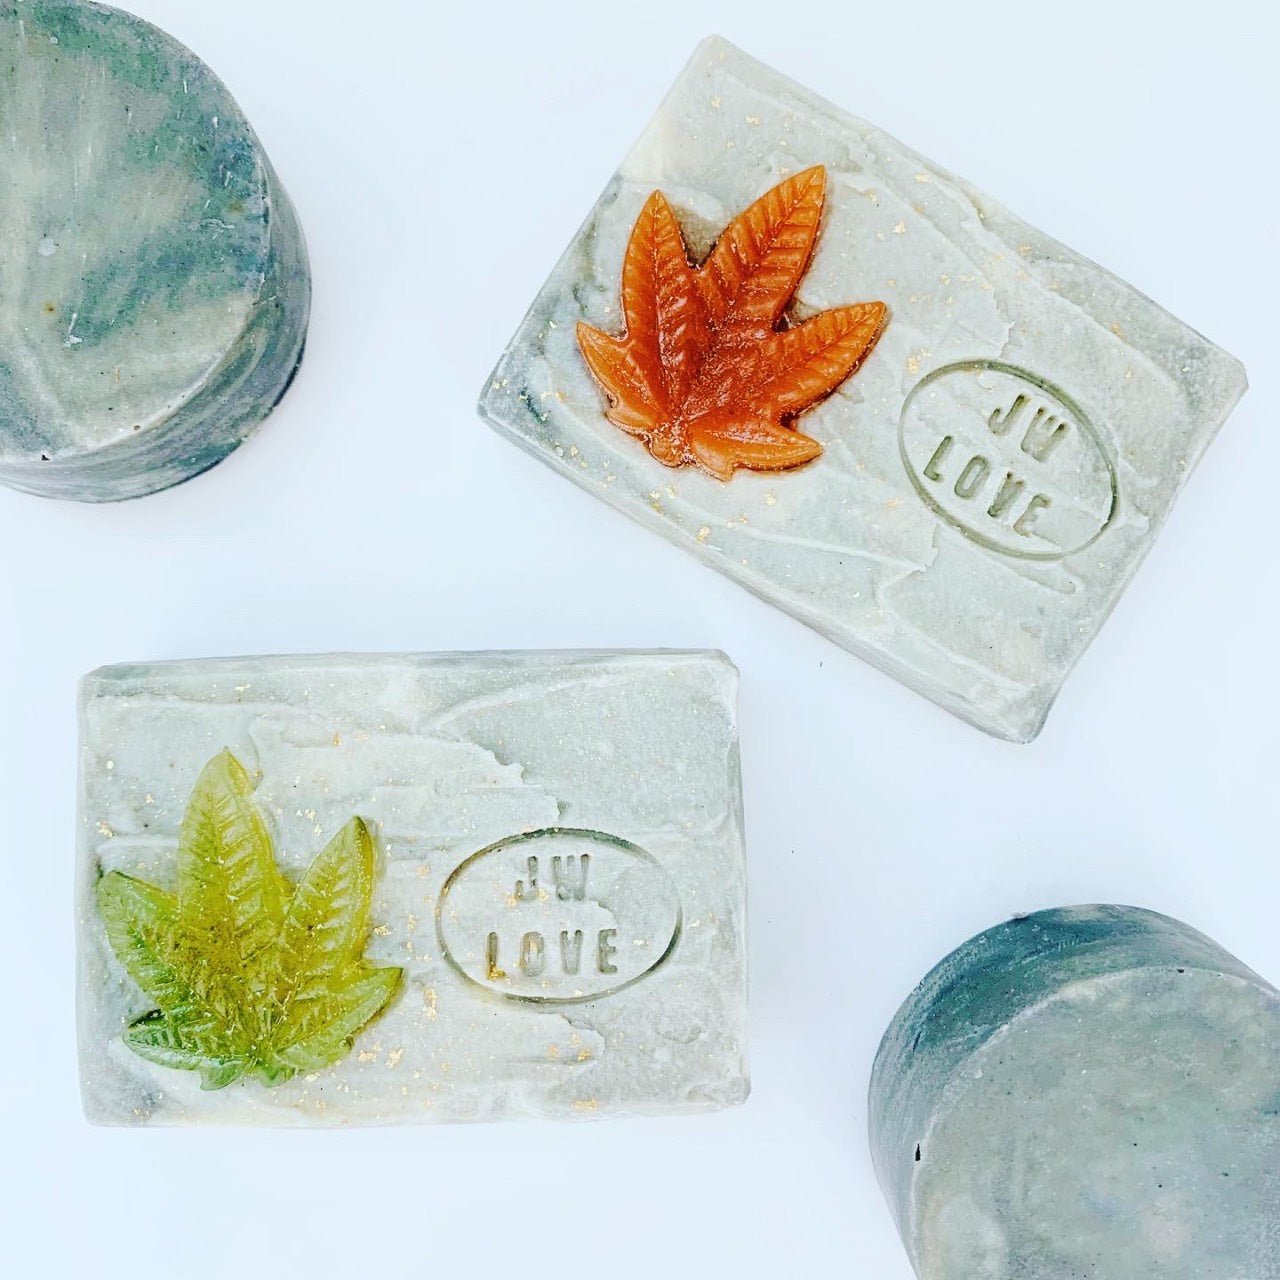 Handcrafted JW LOVE stamped Leaf Shea Soap